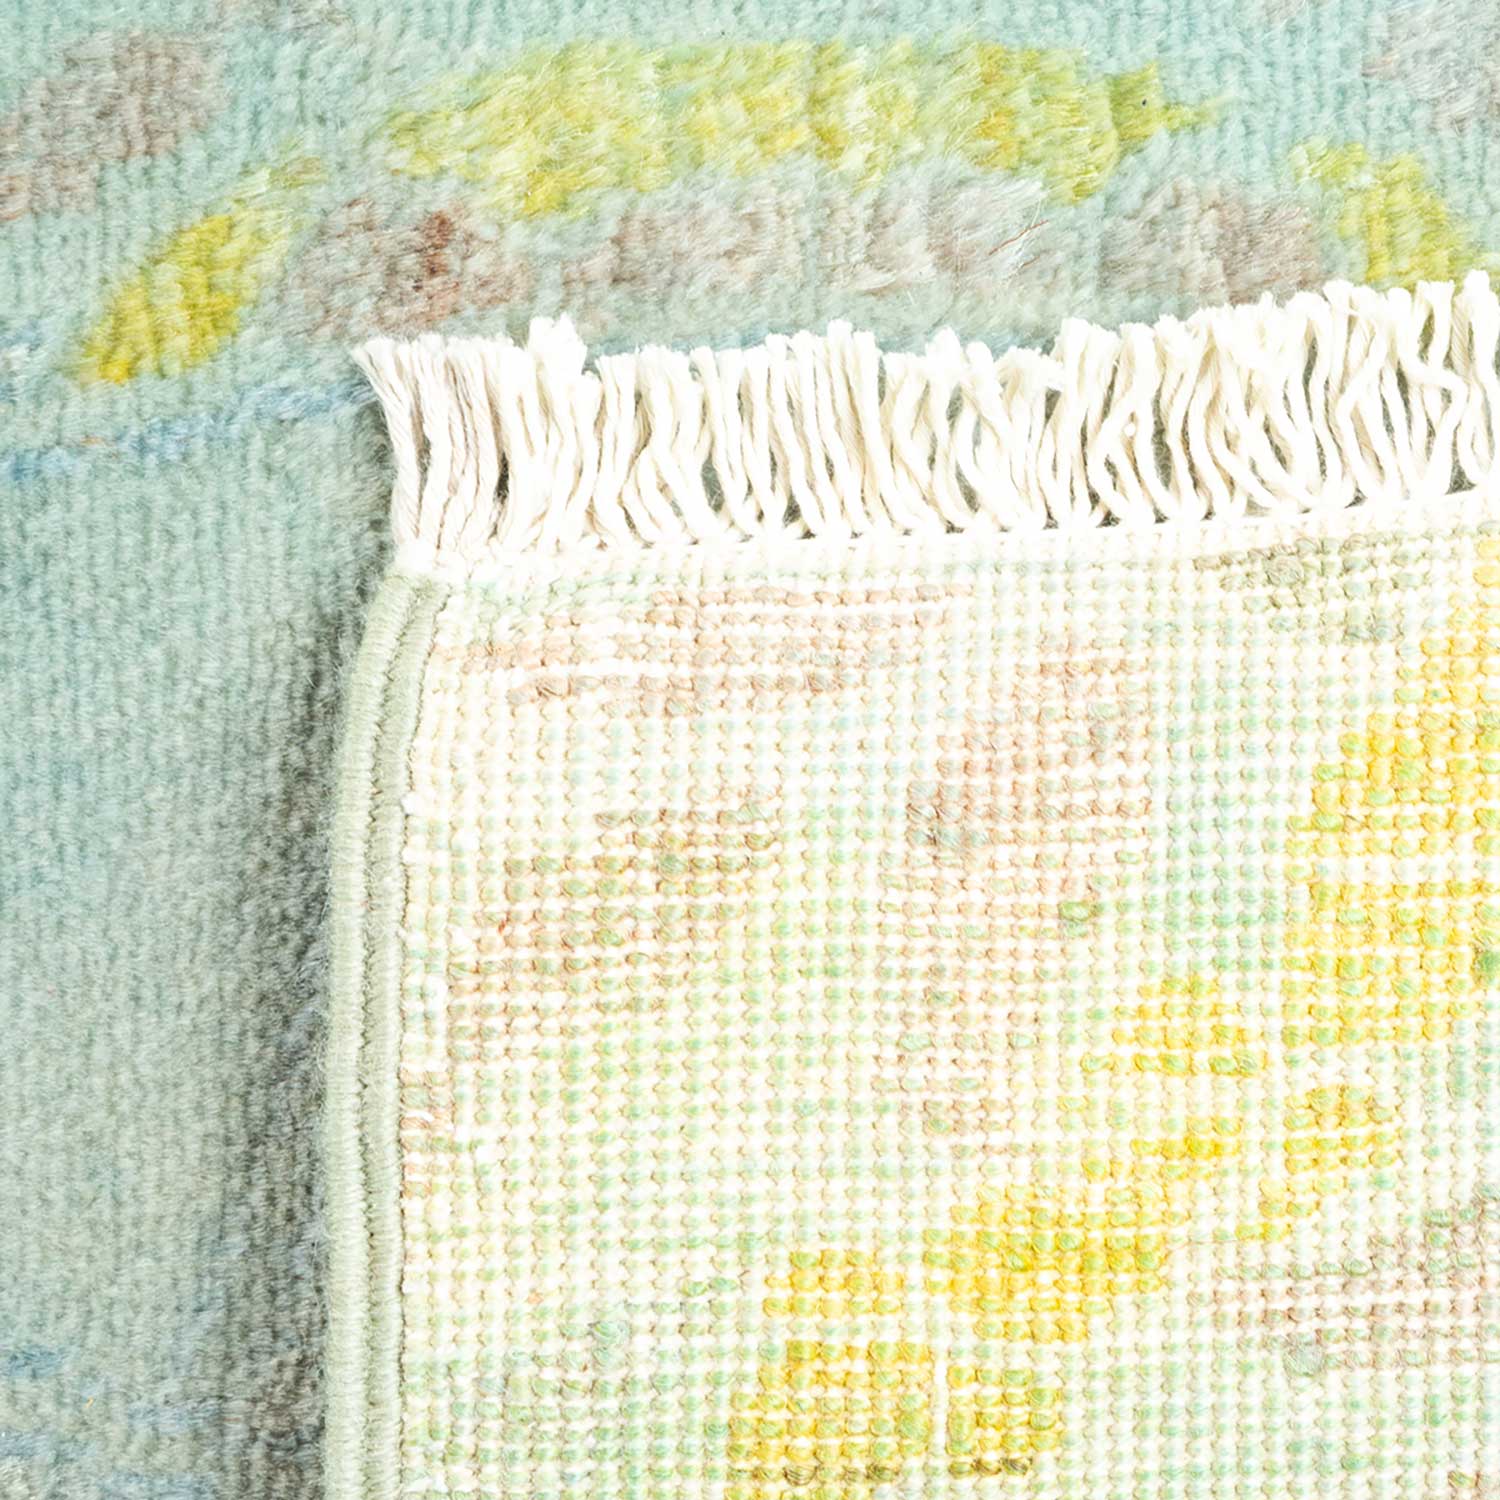 Close-up view of colorful woven fabric and blurred abstract pattern.